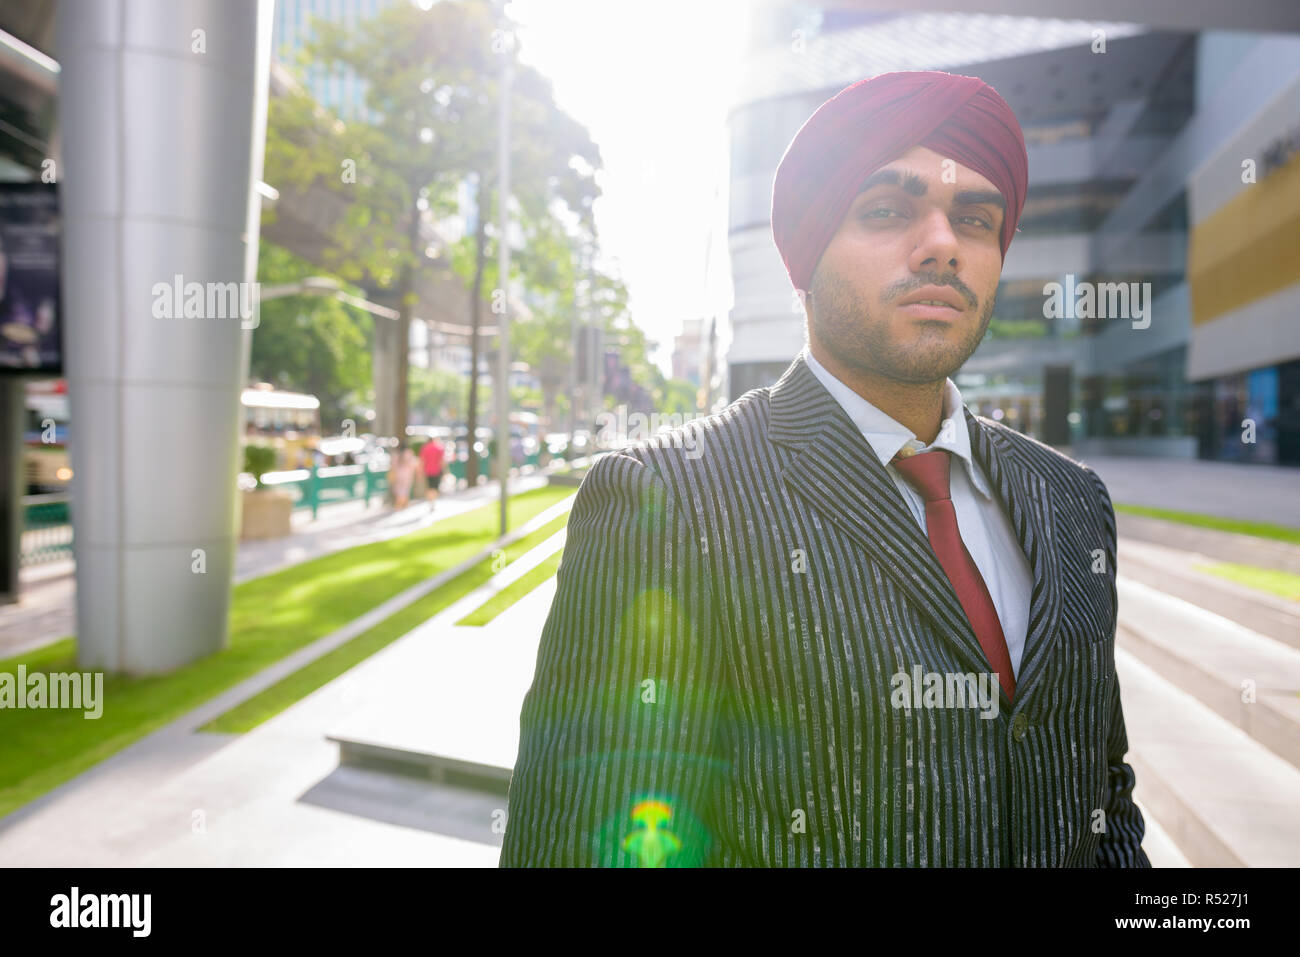 Portrait of Indian businessman outdoors in city with lens flare Stock Photo